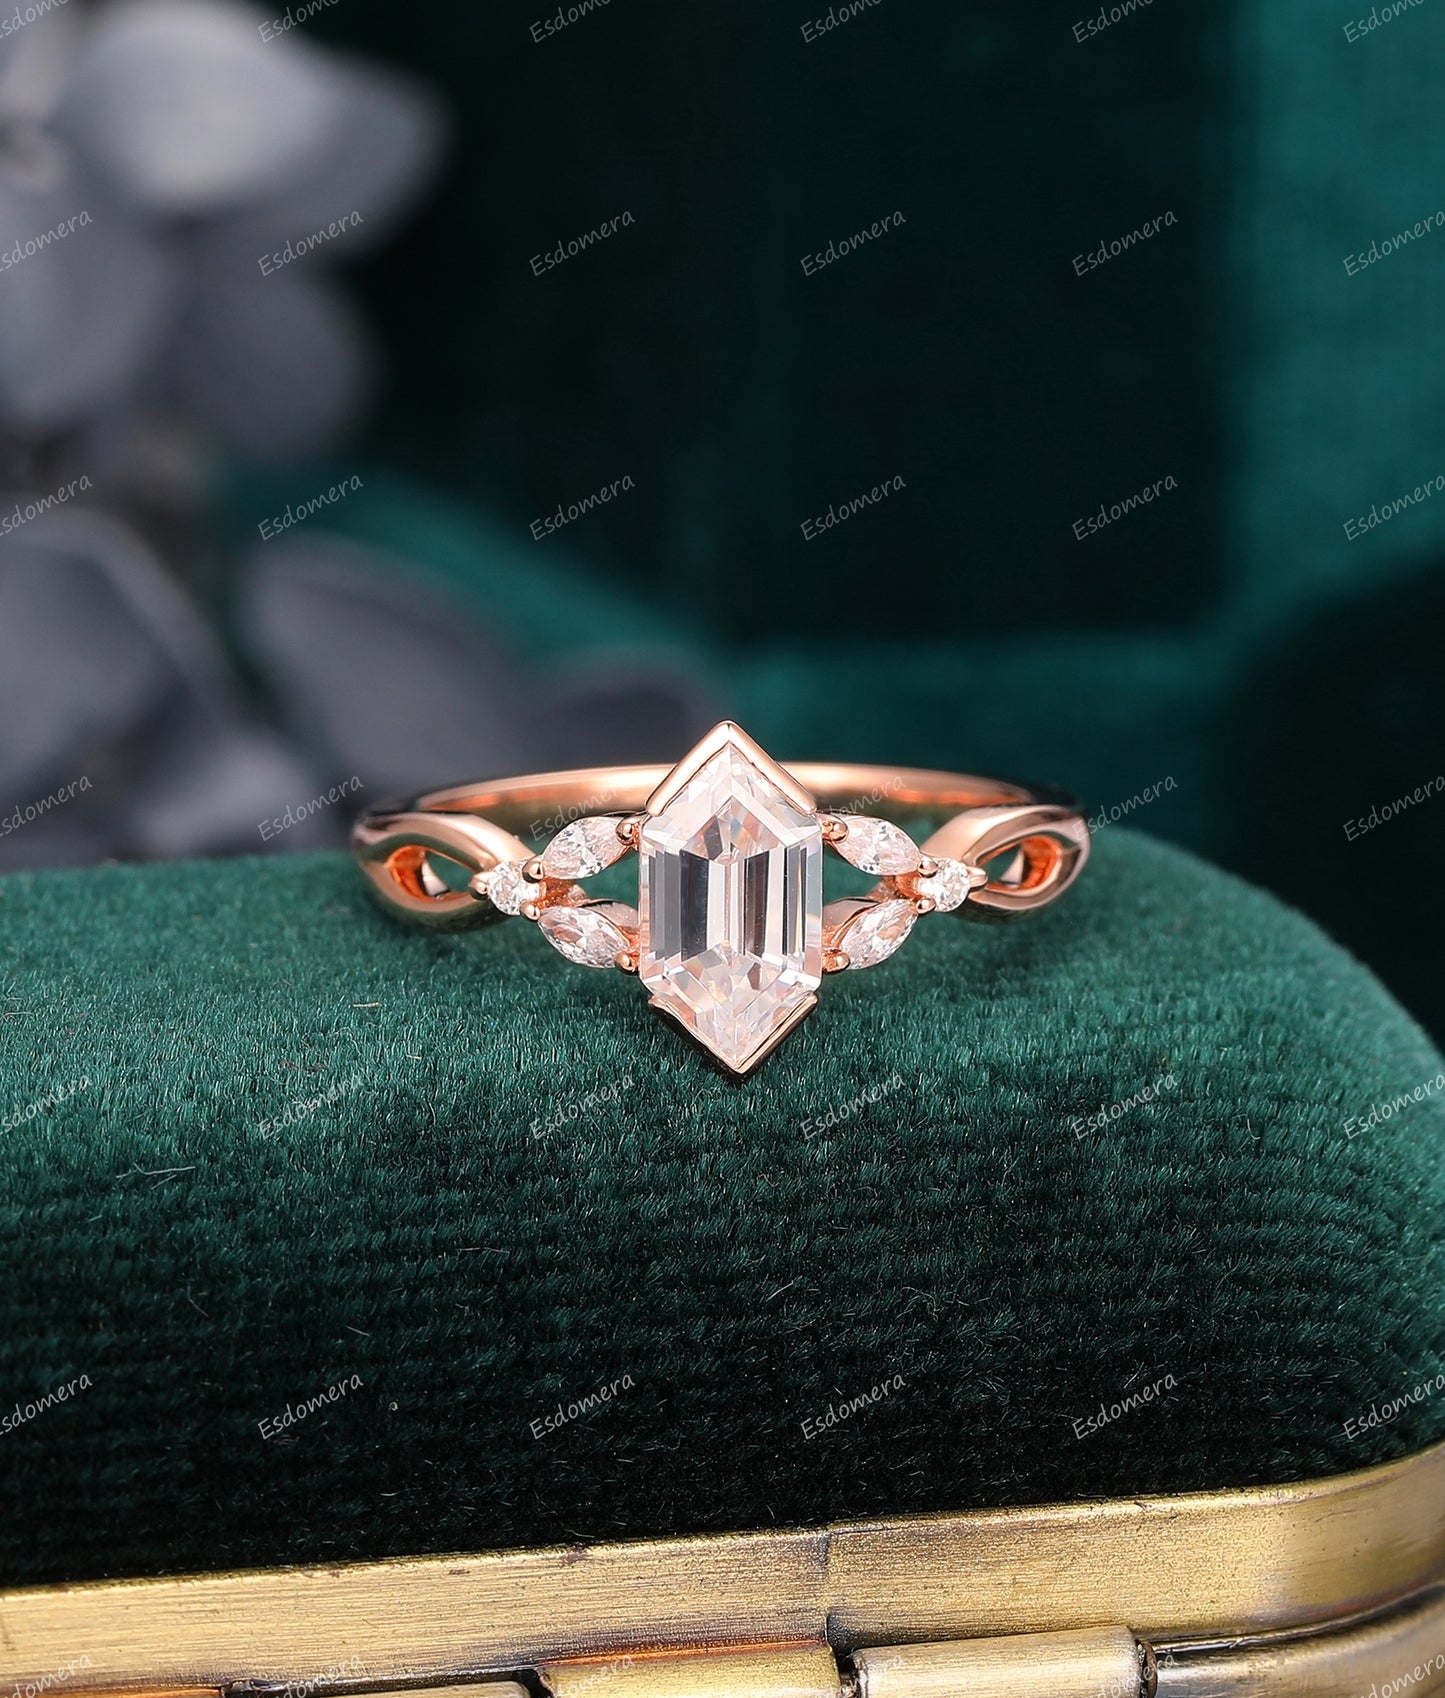 14K Gold 1.1CT Hexagon Cut Moissanite Engagement Ring, Unique Cross Band Wedding Ring